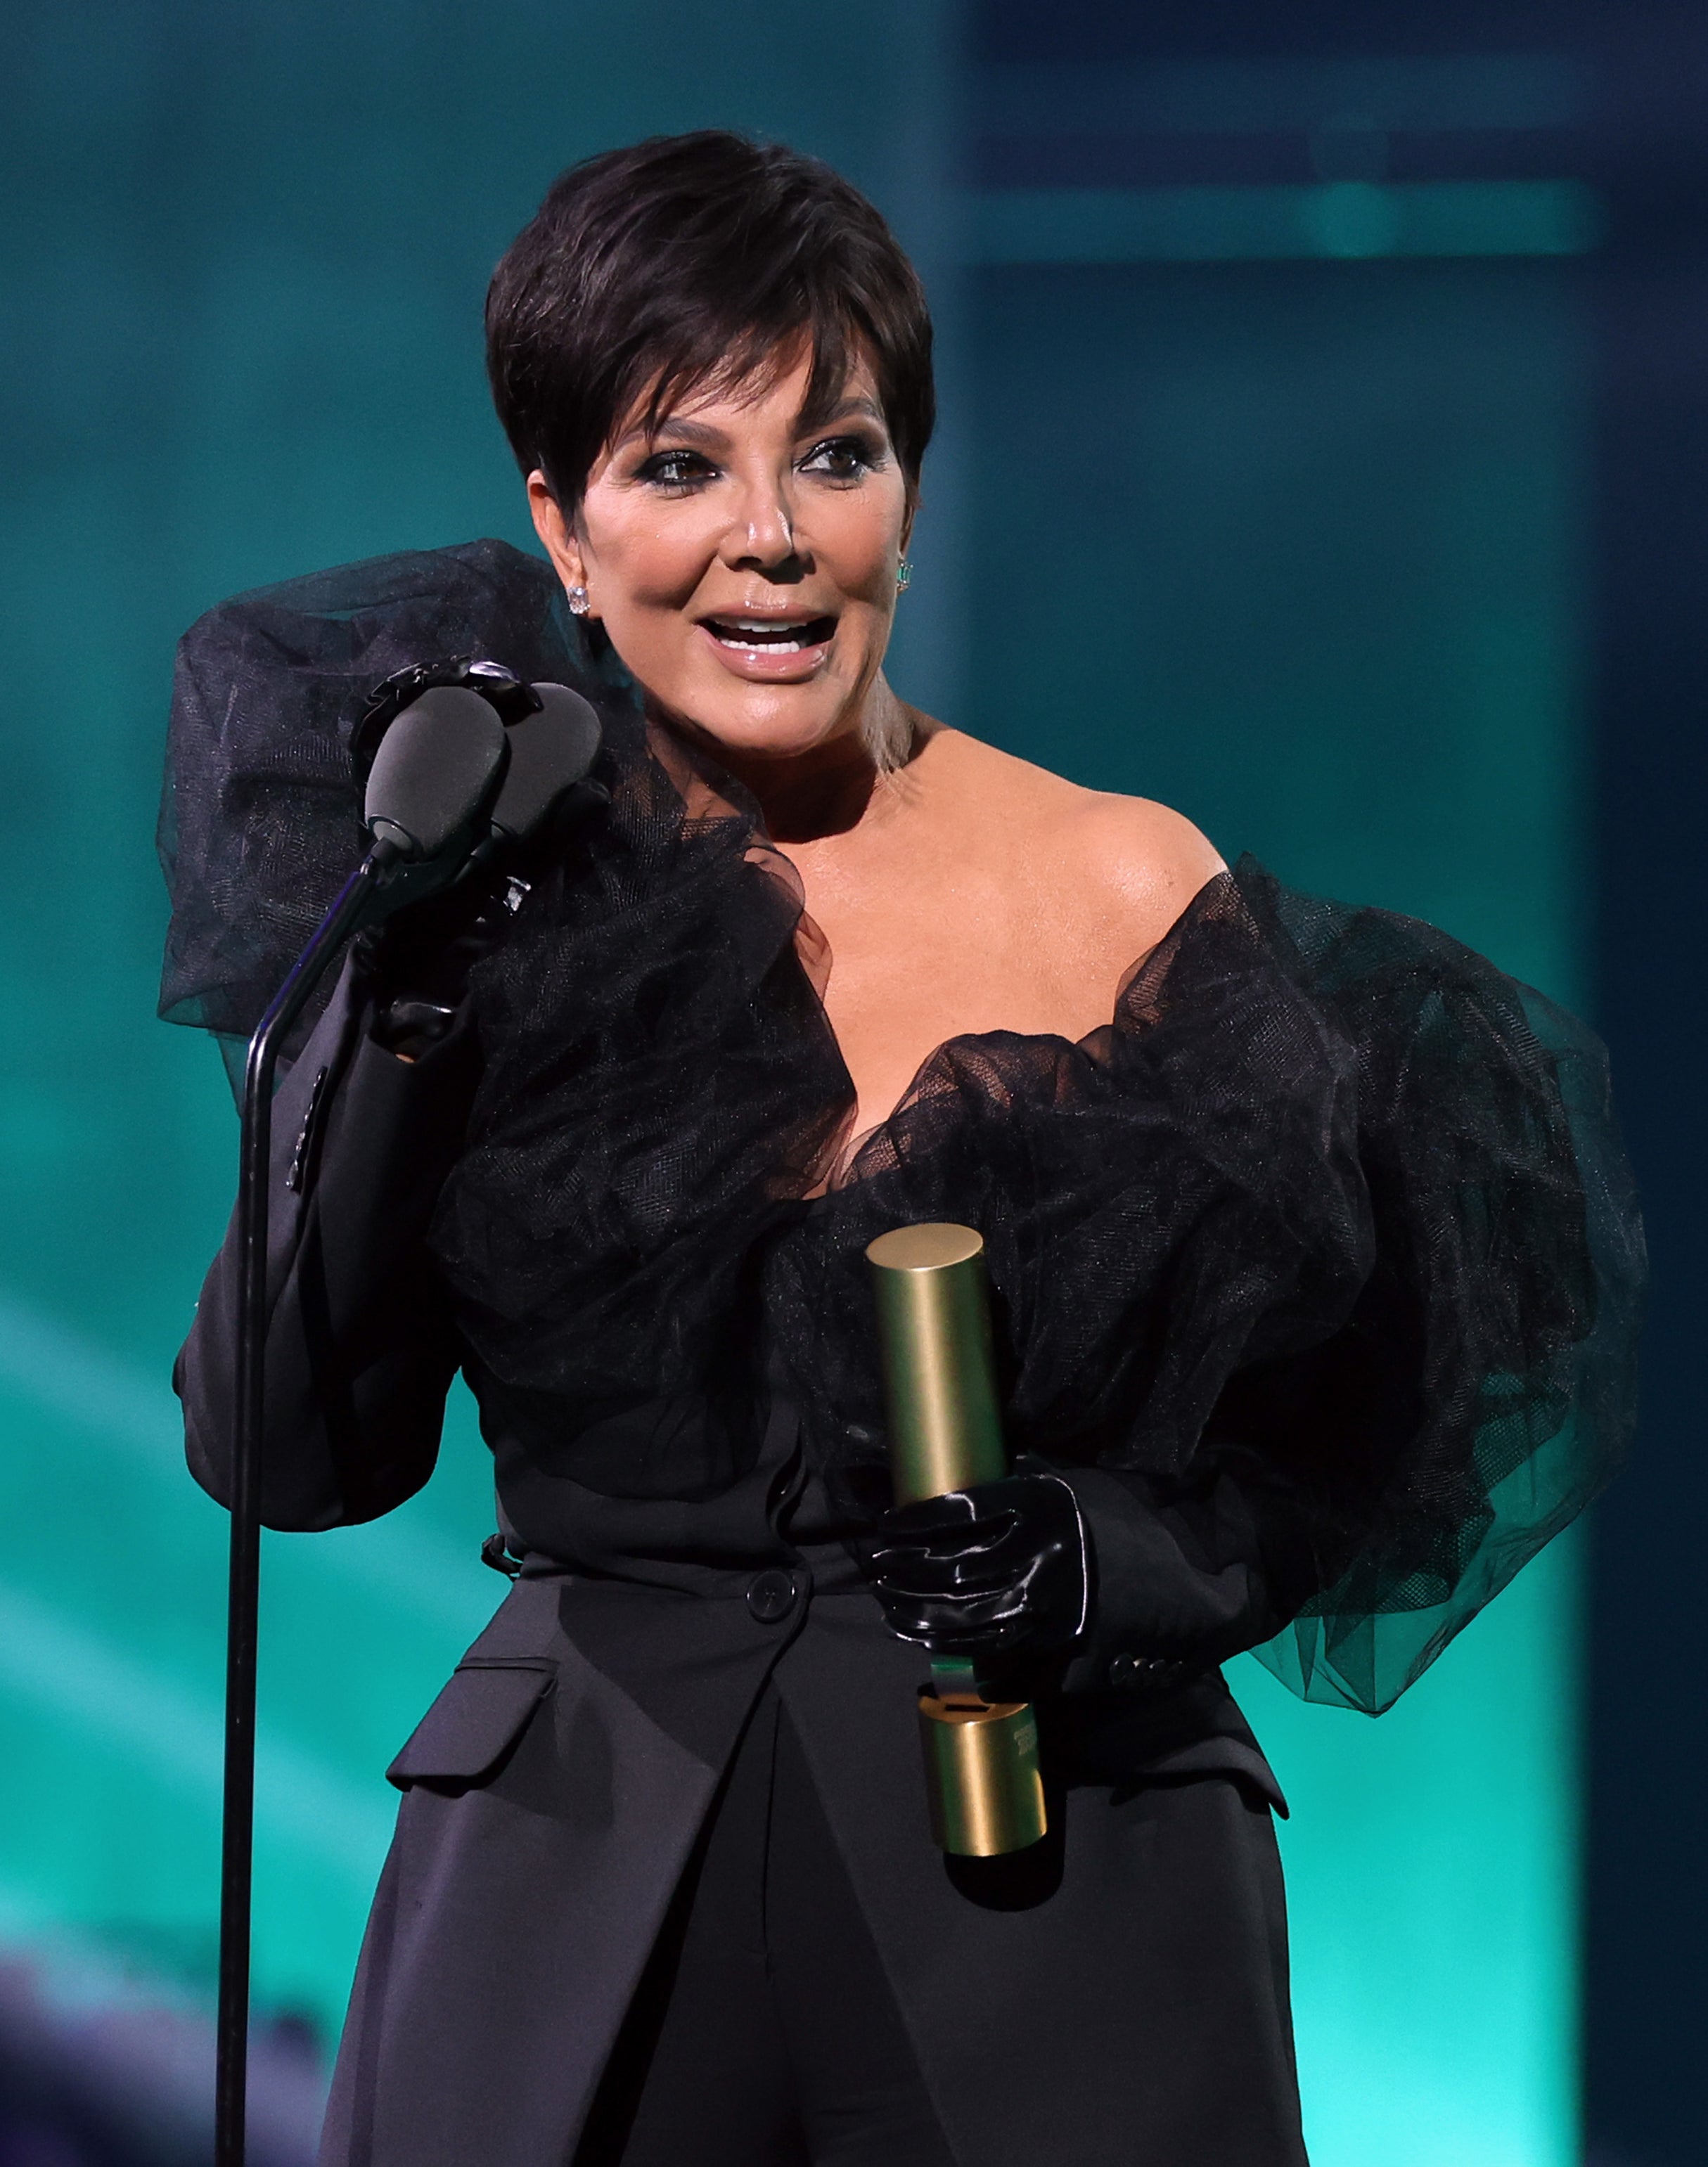 Close-up of Kris at a microphone holding an award